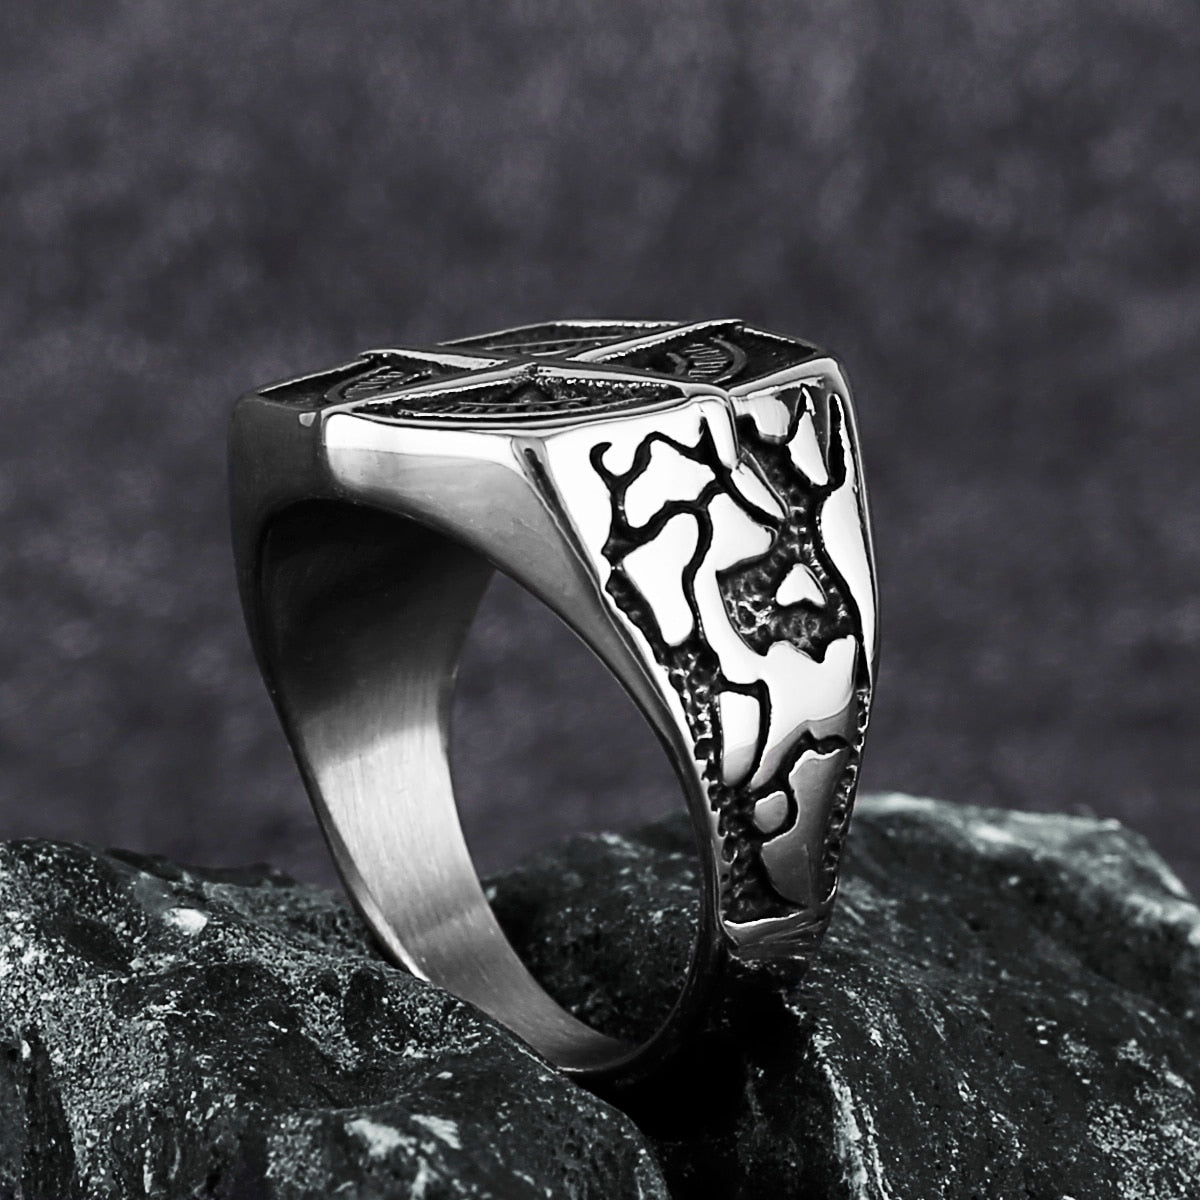 Nautical Chart Ring in Stainless Steel - GalacticElements